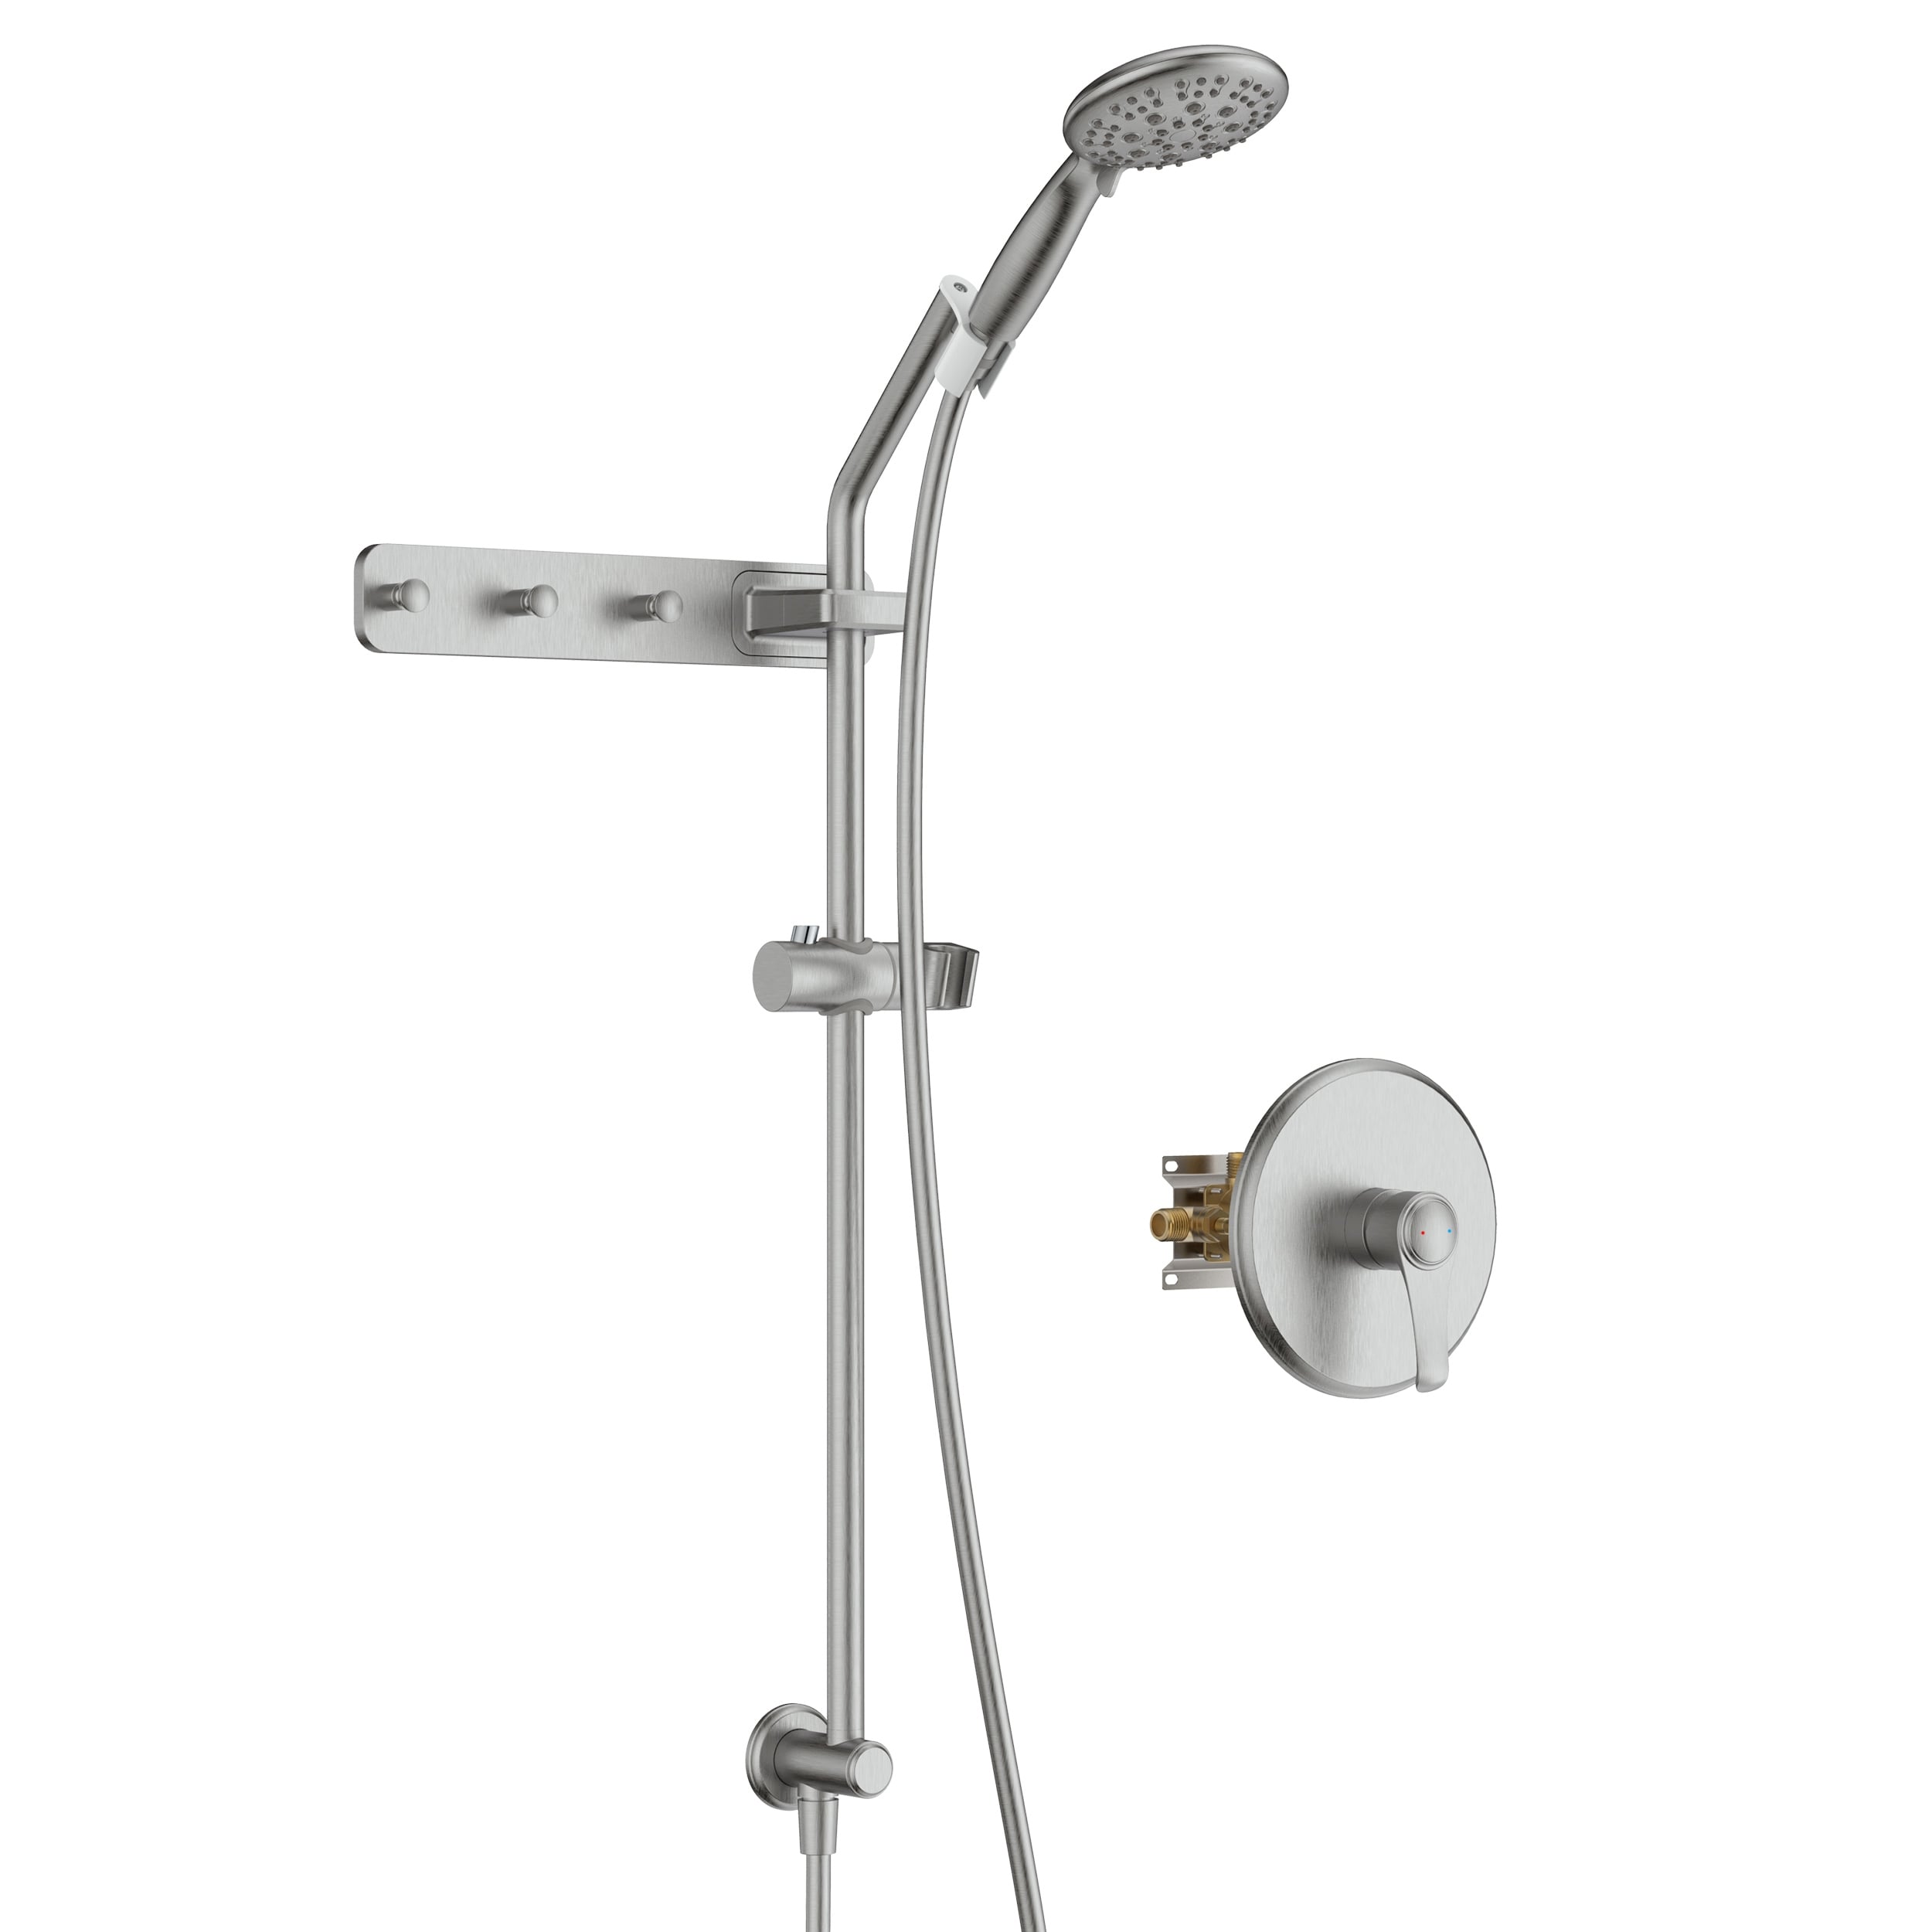 https://ak1.ostkcdn.com/images/products/is/images/direct/43fa17fe50044ebf83abc9e09dd81f8a1e60e1e0/Multi-Function-Shower-Head---Shower-System-with-4%22-Rain-Showerhead-And-Storage-Hook%2C-Simple-Style%2C-Brushed-Nickel.jpg